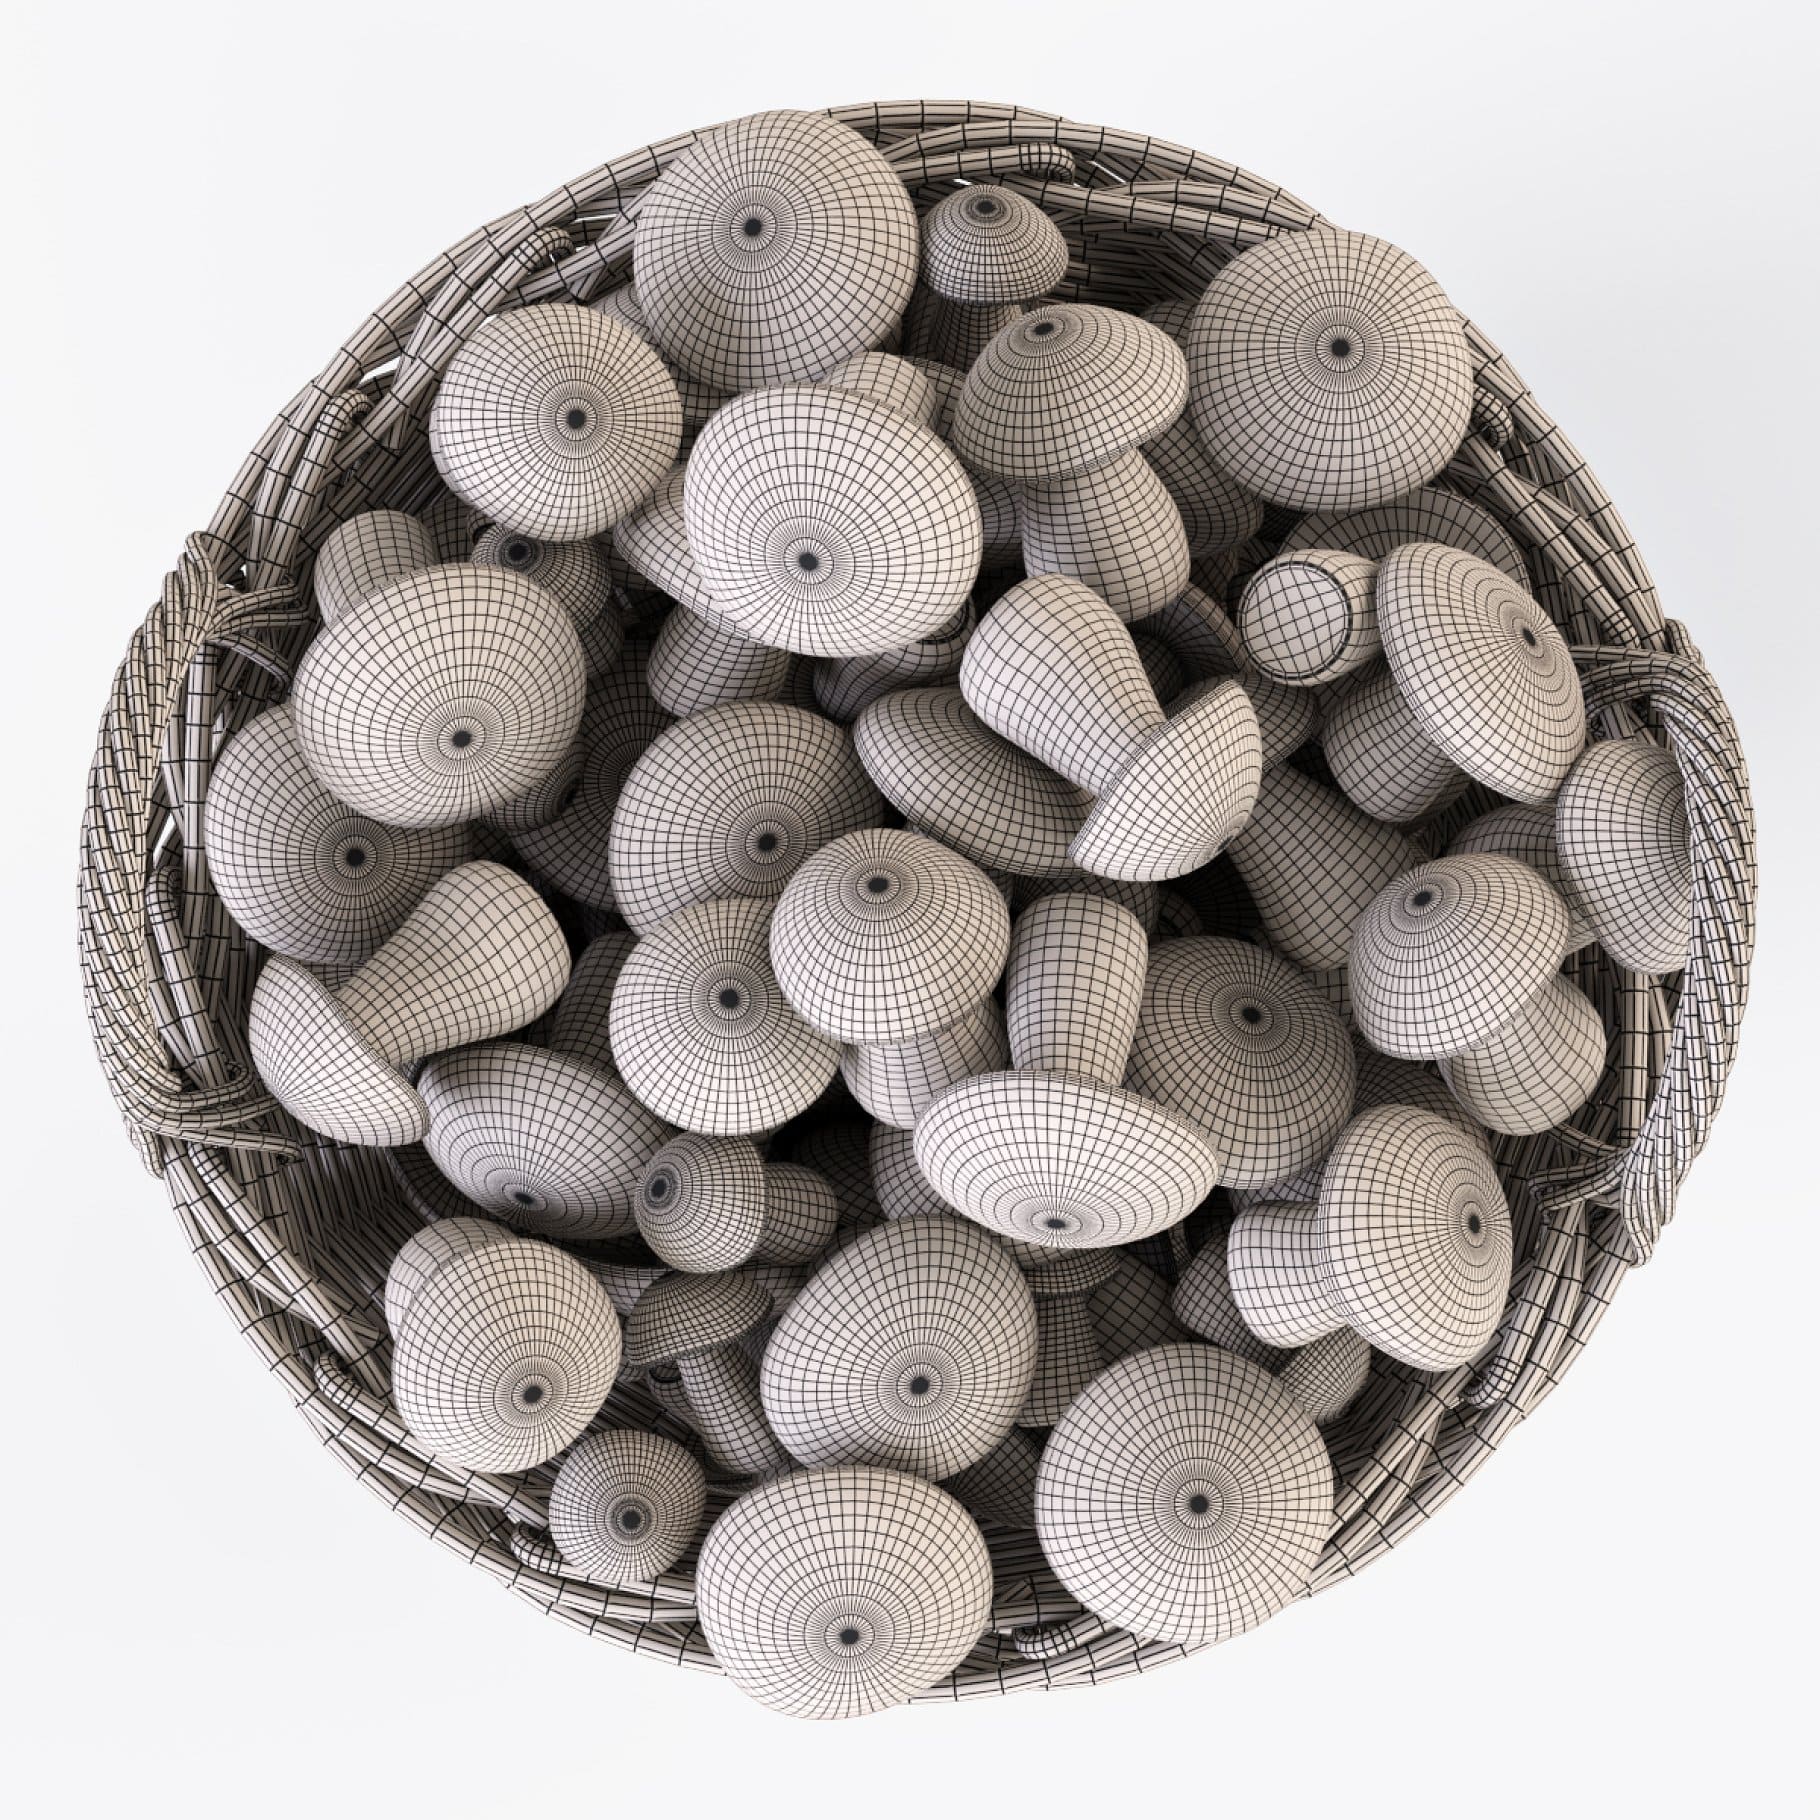 3D model of a basket with mushrooms with a black spot in the middle.